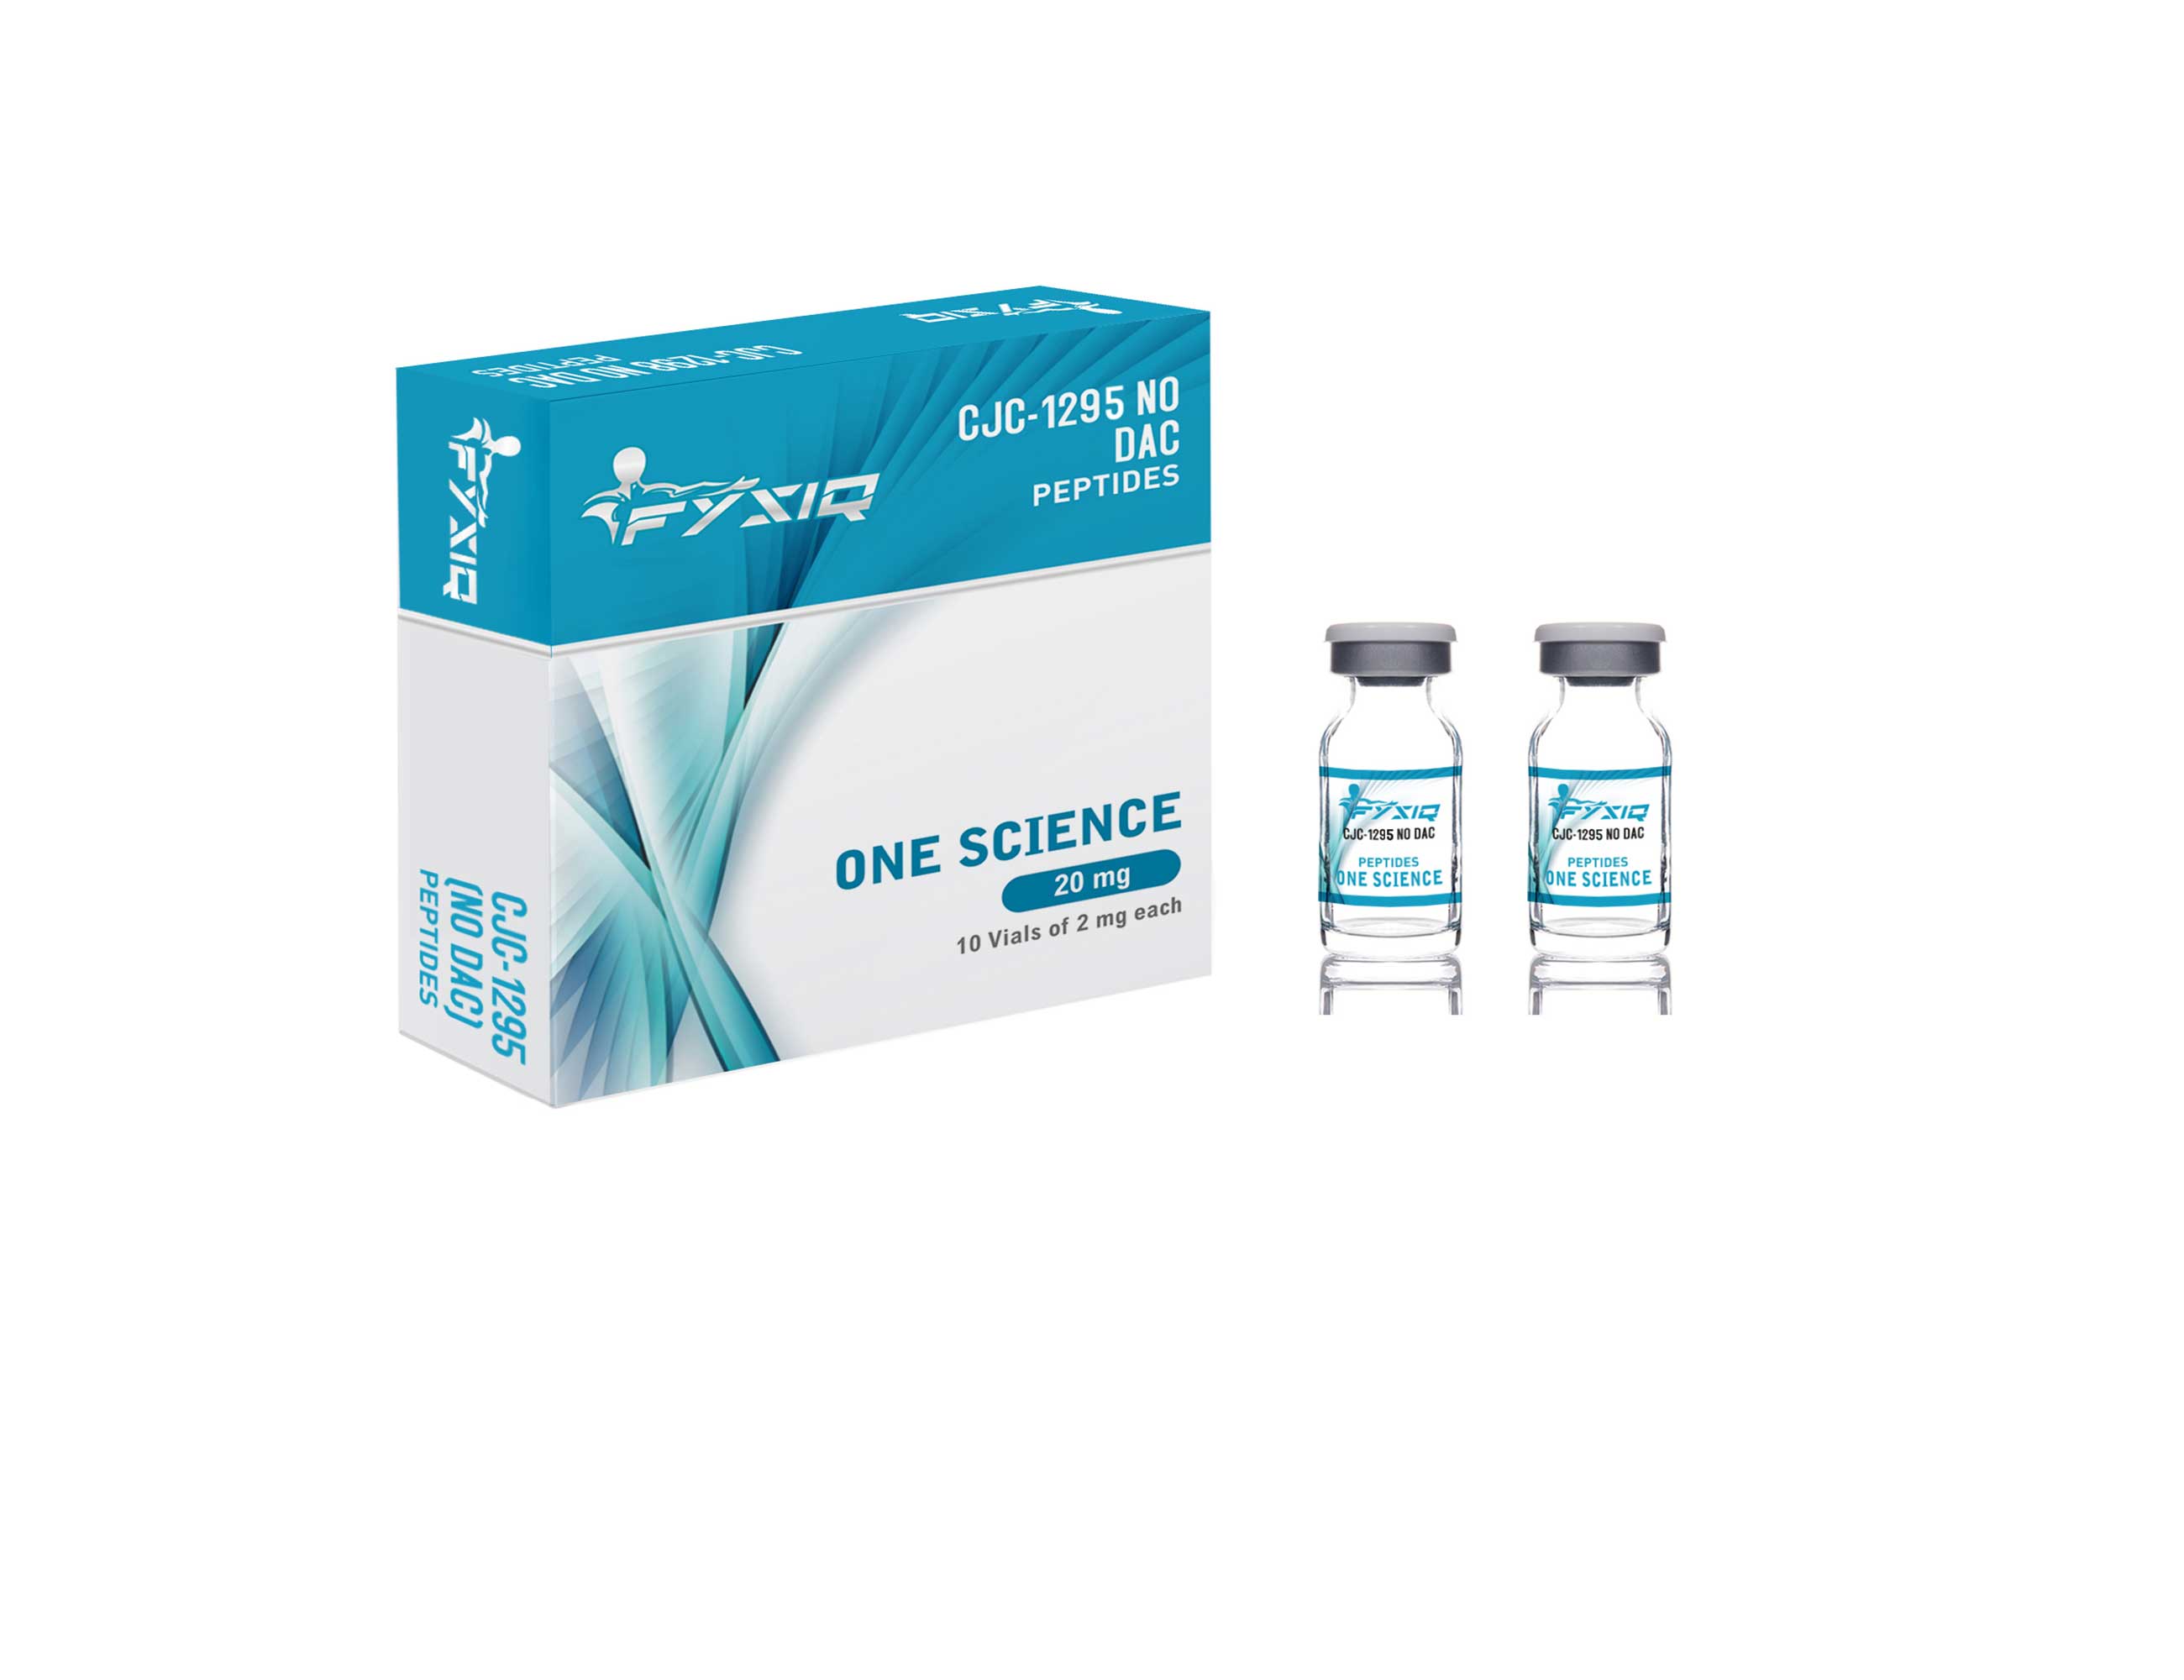 cjc 1295 no dac 10 vials of 2 mg,one science,buy fysiqlab inc cjc 1295 no dac 10 vials of 2 mg online,buy fysiqlab inc cjc 1295 no dac 10 vials of 2 mg,buy fysiqlab cjc 1295 no dac 10 vials of 2 mg online,buy cjc 1295 no dac 10 vials of 2 mg online,buy cjc 1295 no dac online,buy cjc 1295 no dac,buy fysiqlab inc one science online,buy fysiqlab inc one science,buy fysiqlab one science online,buy one science online,